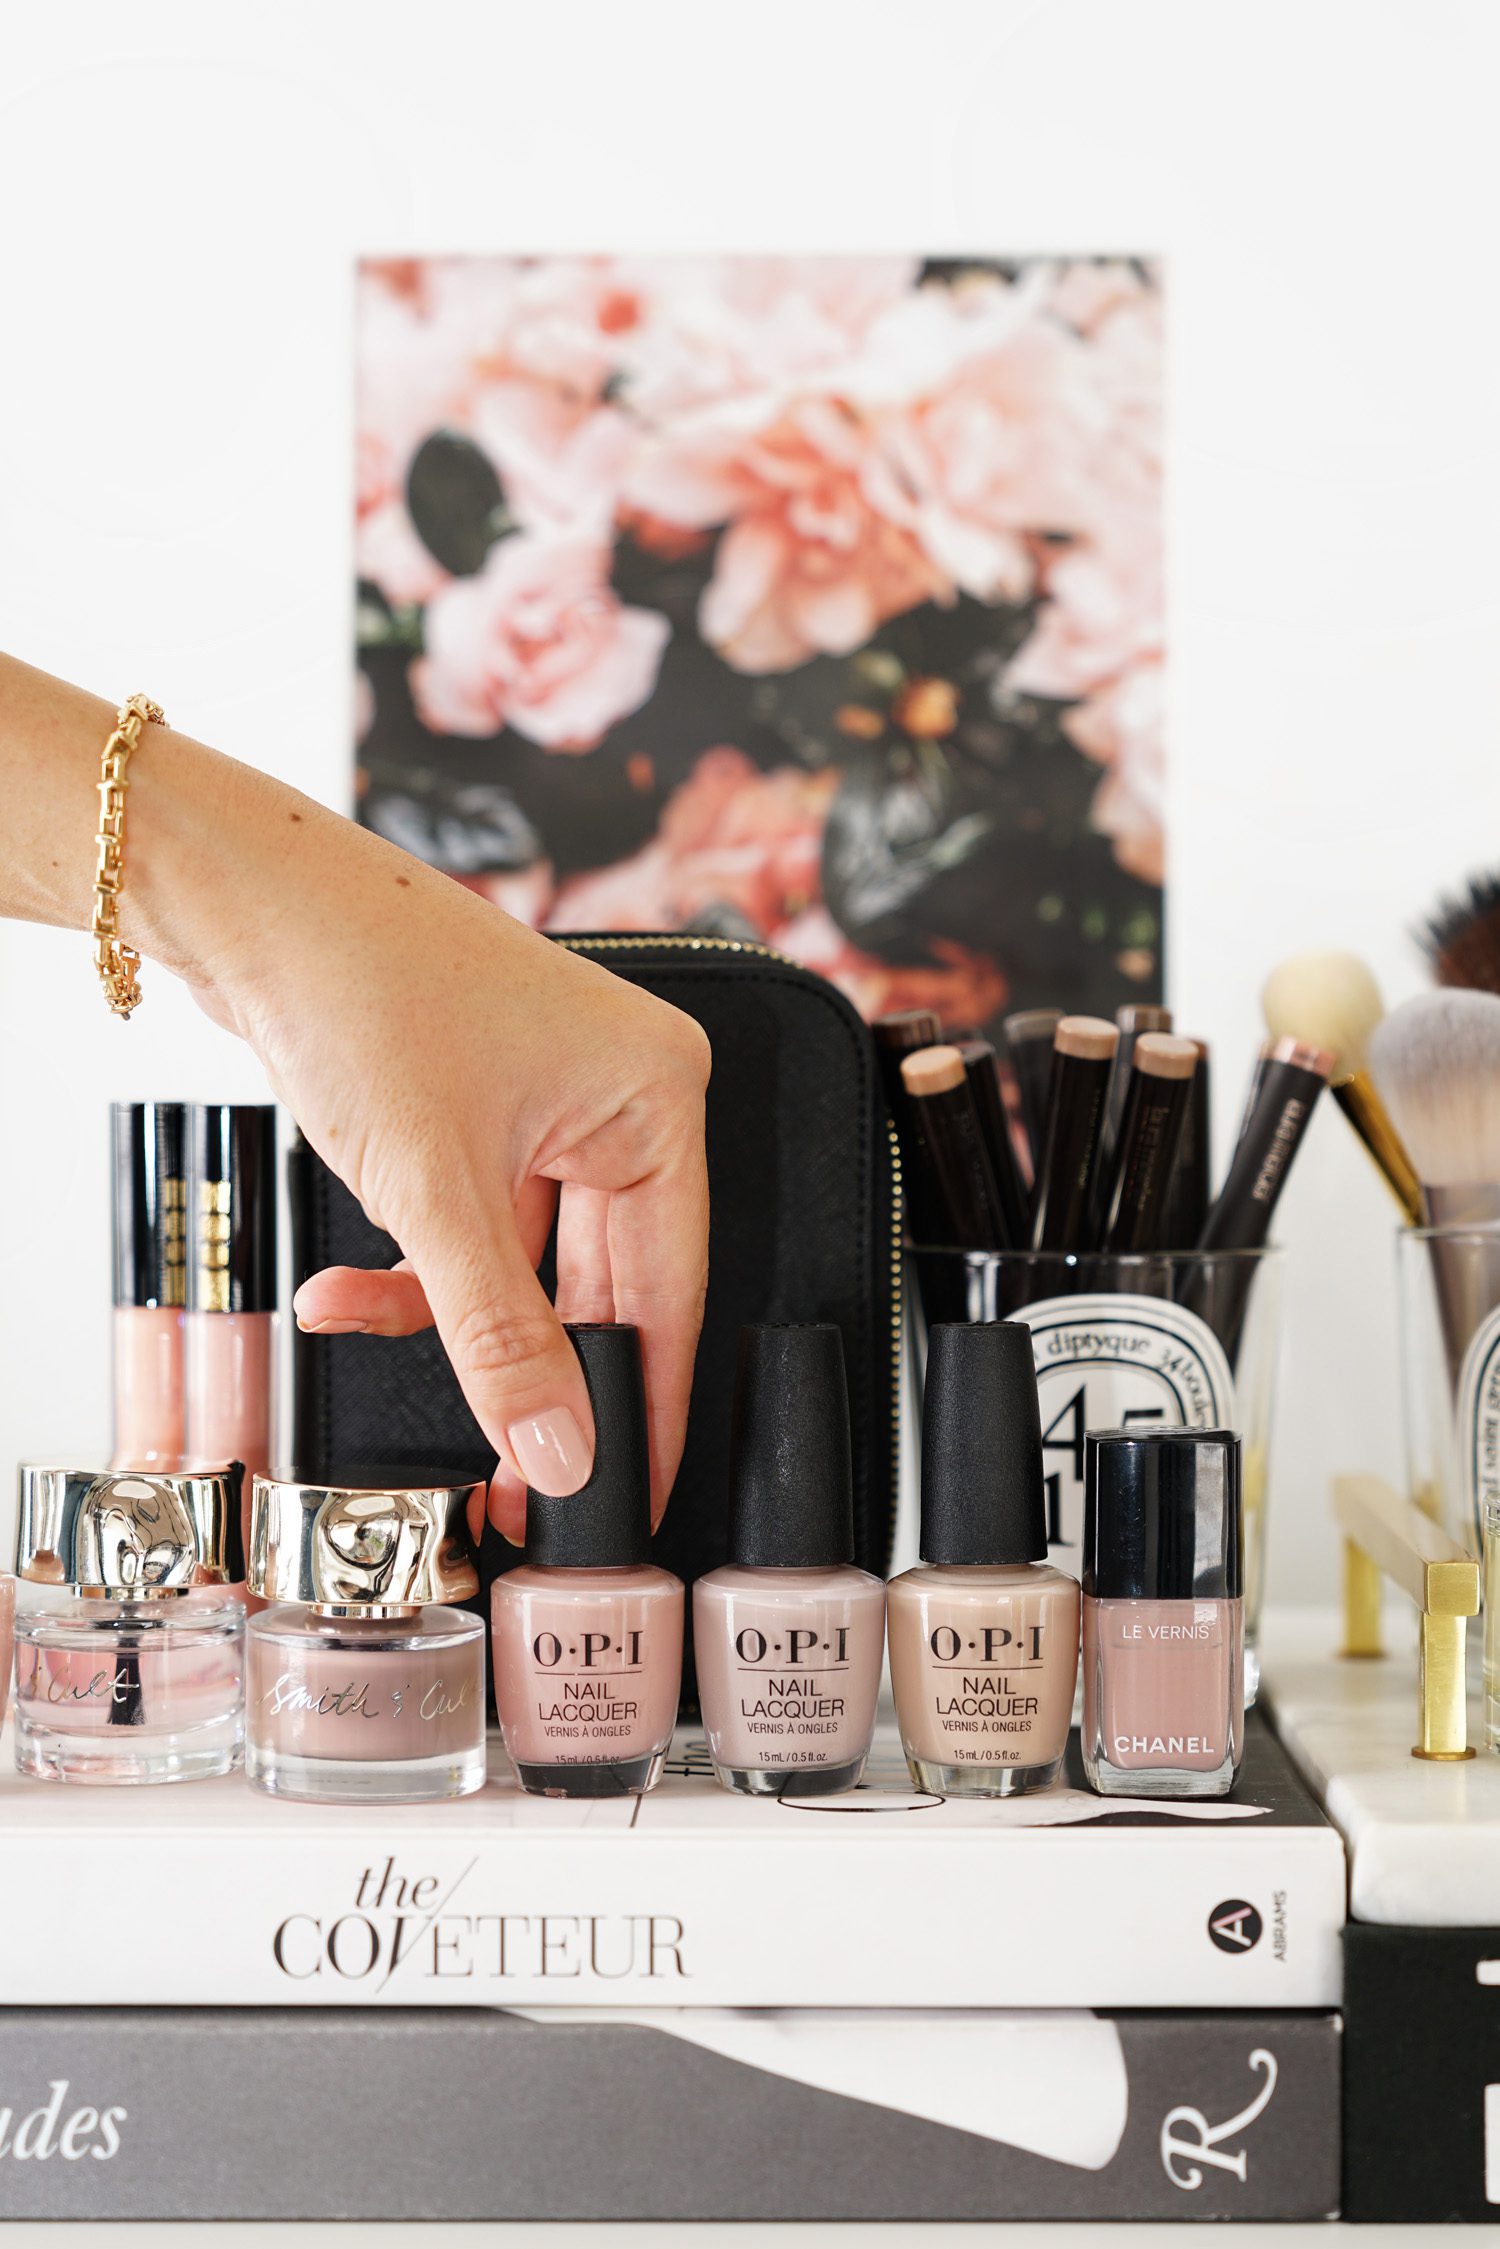 How to choose the right nail color and avoid Old Lady hands